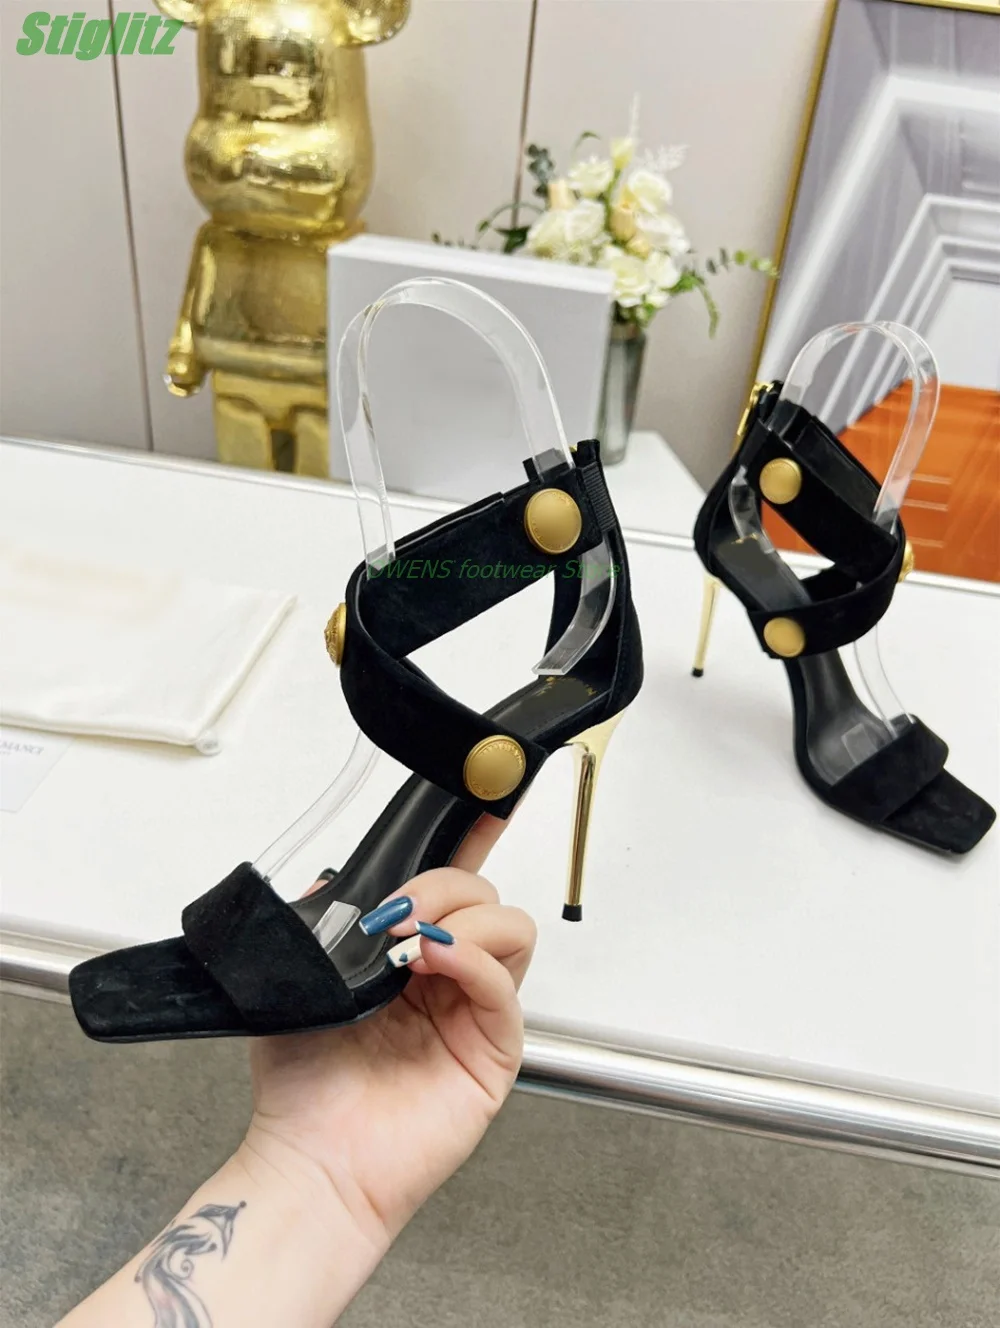 

Cross Straps Sandals Metal Thin High Heel Sexy Black Women Shoes Square Toe Zip Fashion Summer Strappy Party Shoes Button